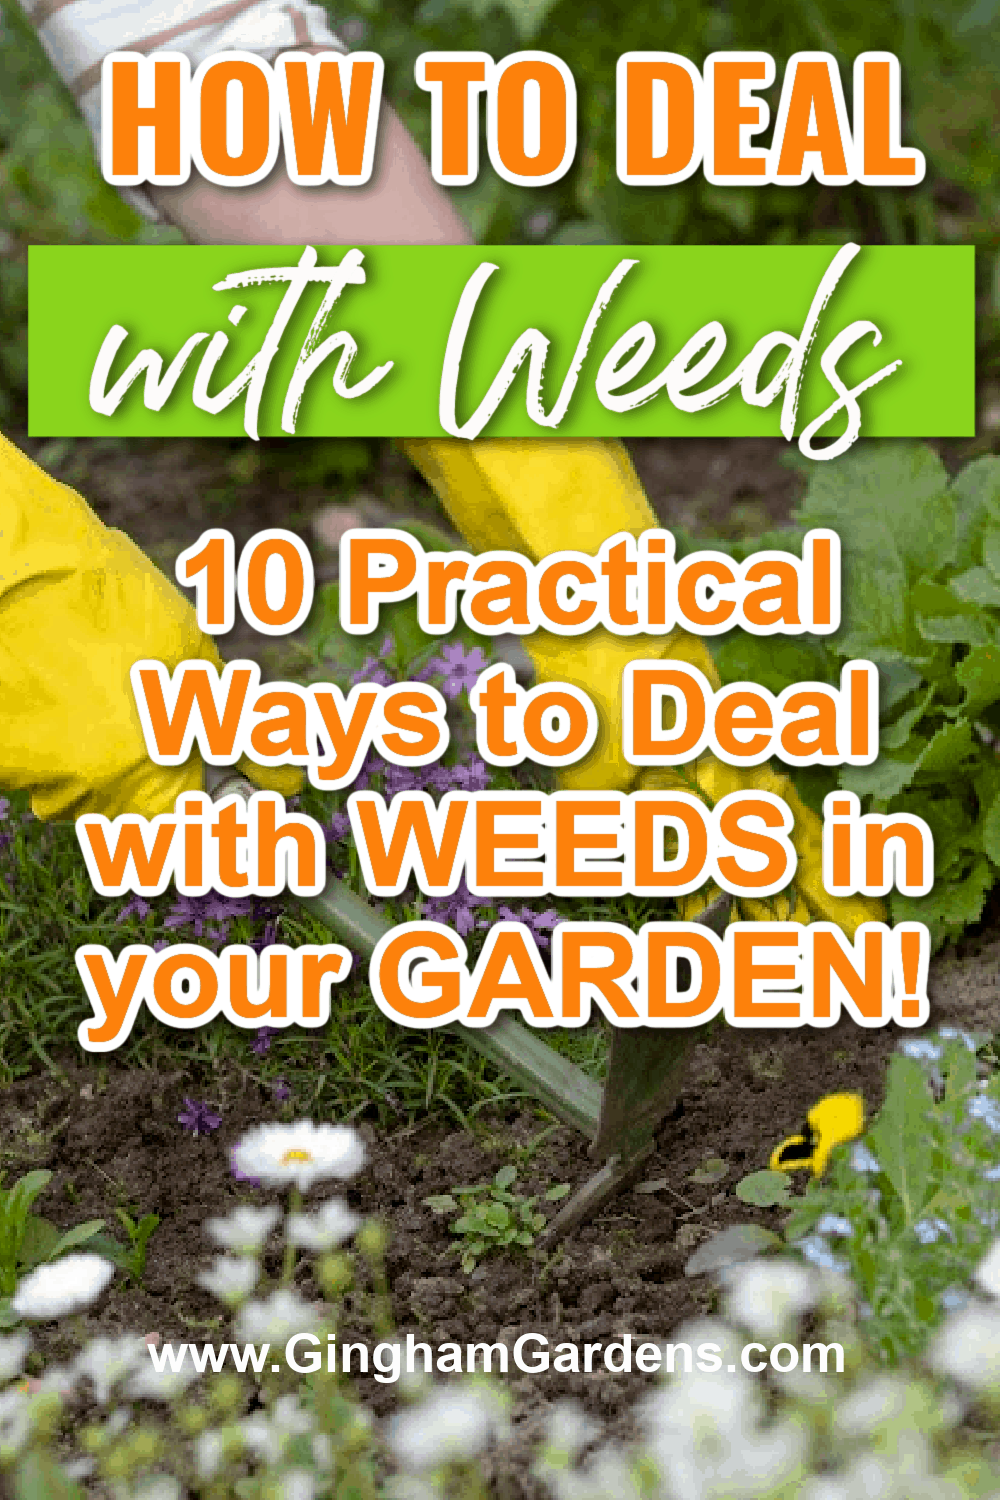 Image of a gardener pulling weeds with text overlay - 10 practical ways to Deal with Weeds In Your Garden